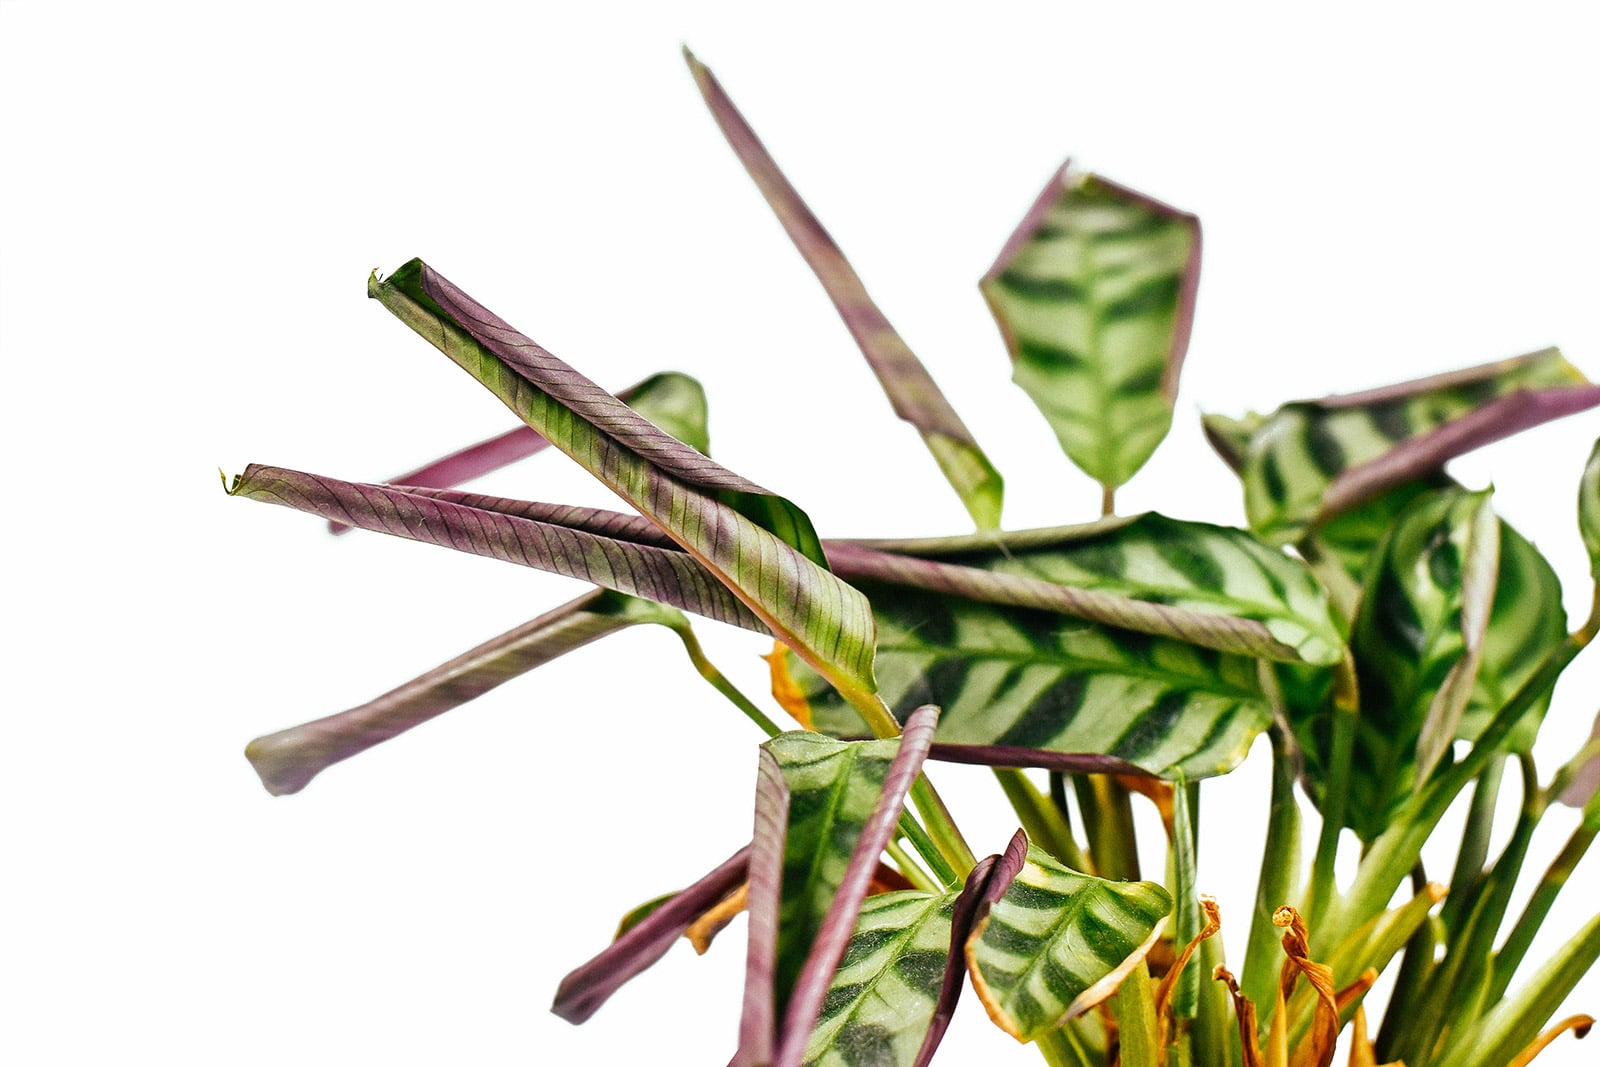 Underwatered Ctenanthe plant showing thirst with curled and rolled up leaves